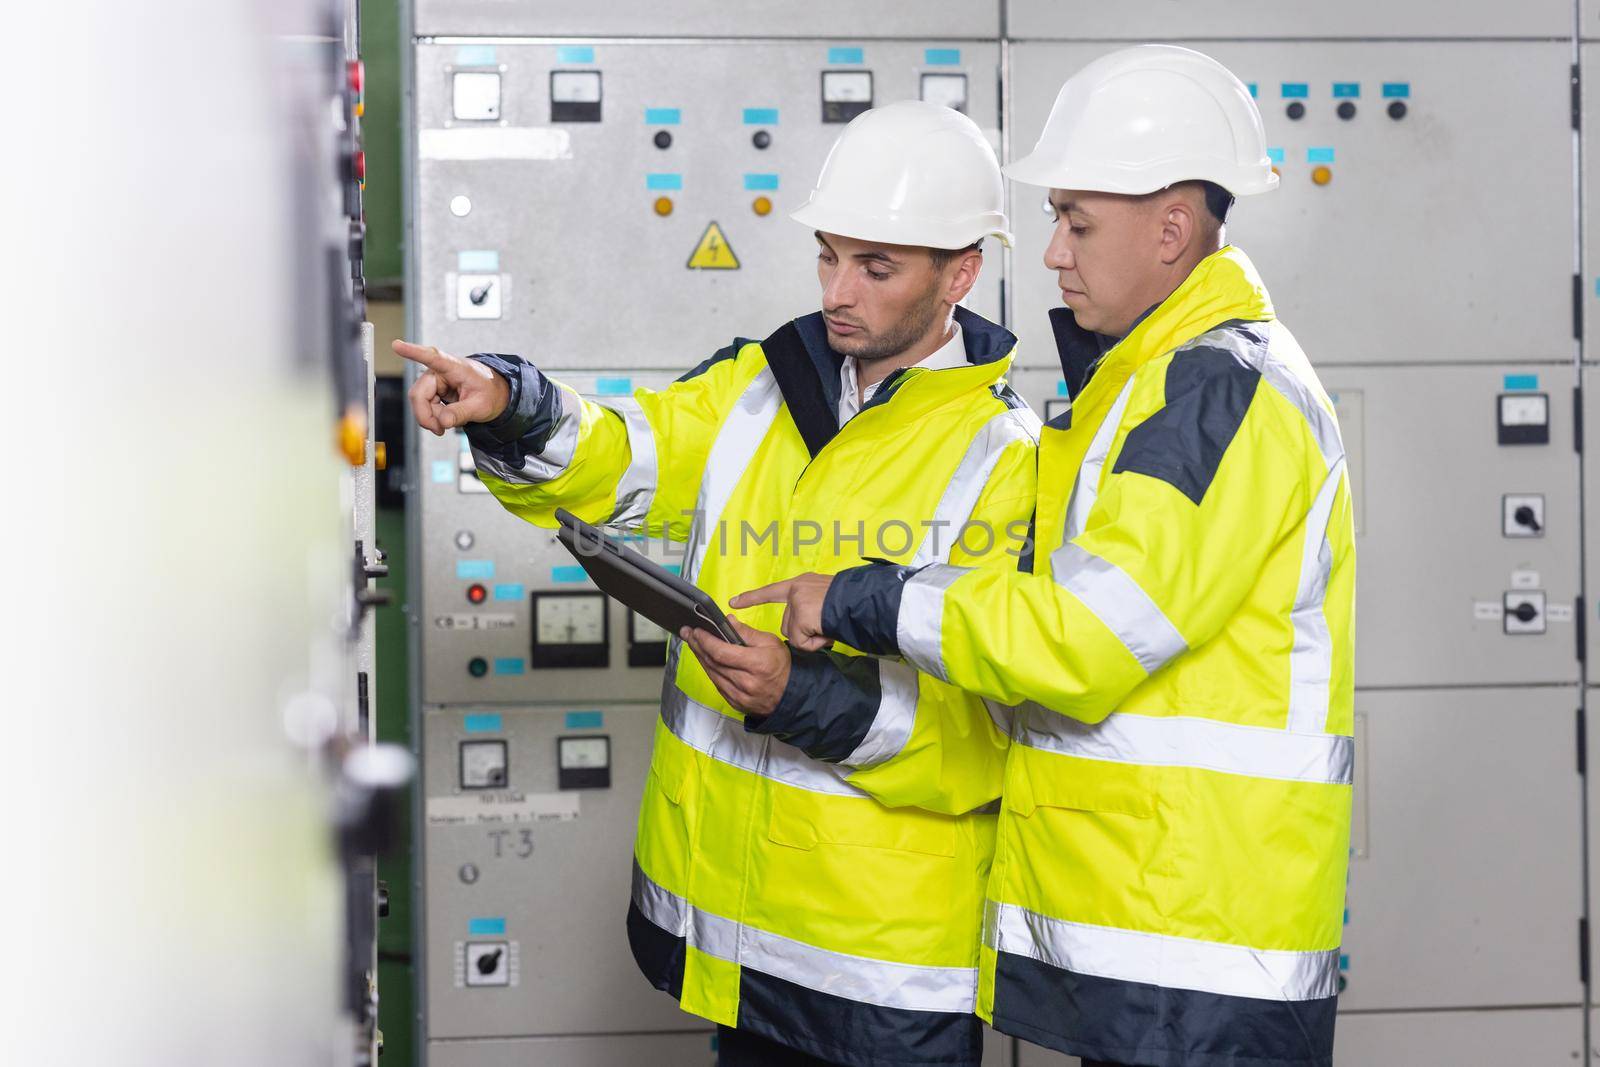 Electrical engineers checking control panel board with tablet. High voltage power station. Electrical engineers standing near therminal box of solar panel.